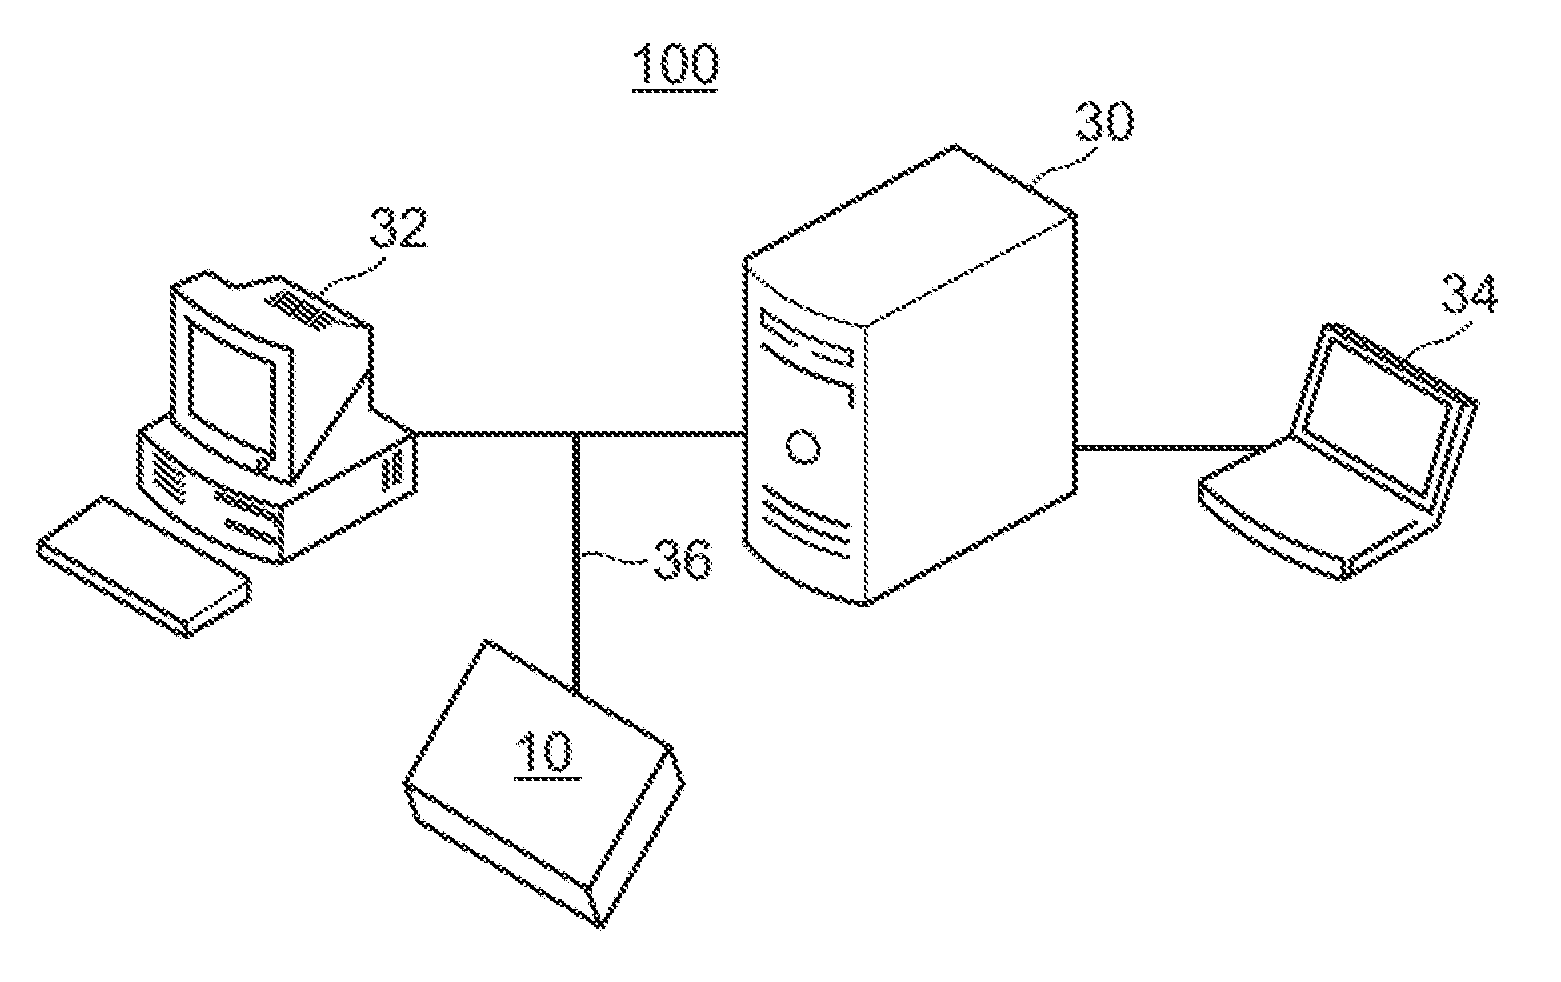 Method of detecting tampering of data in tape drive, and file system